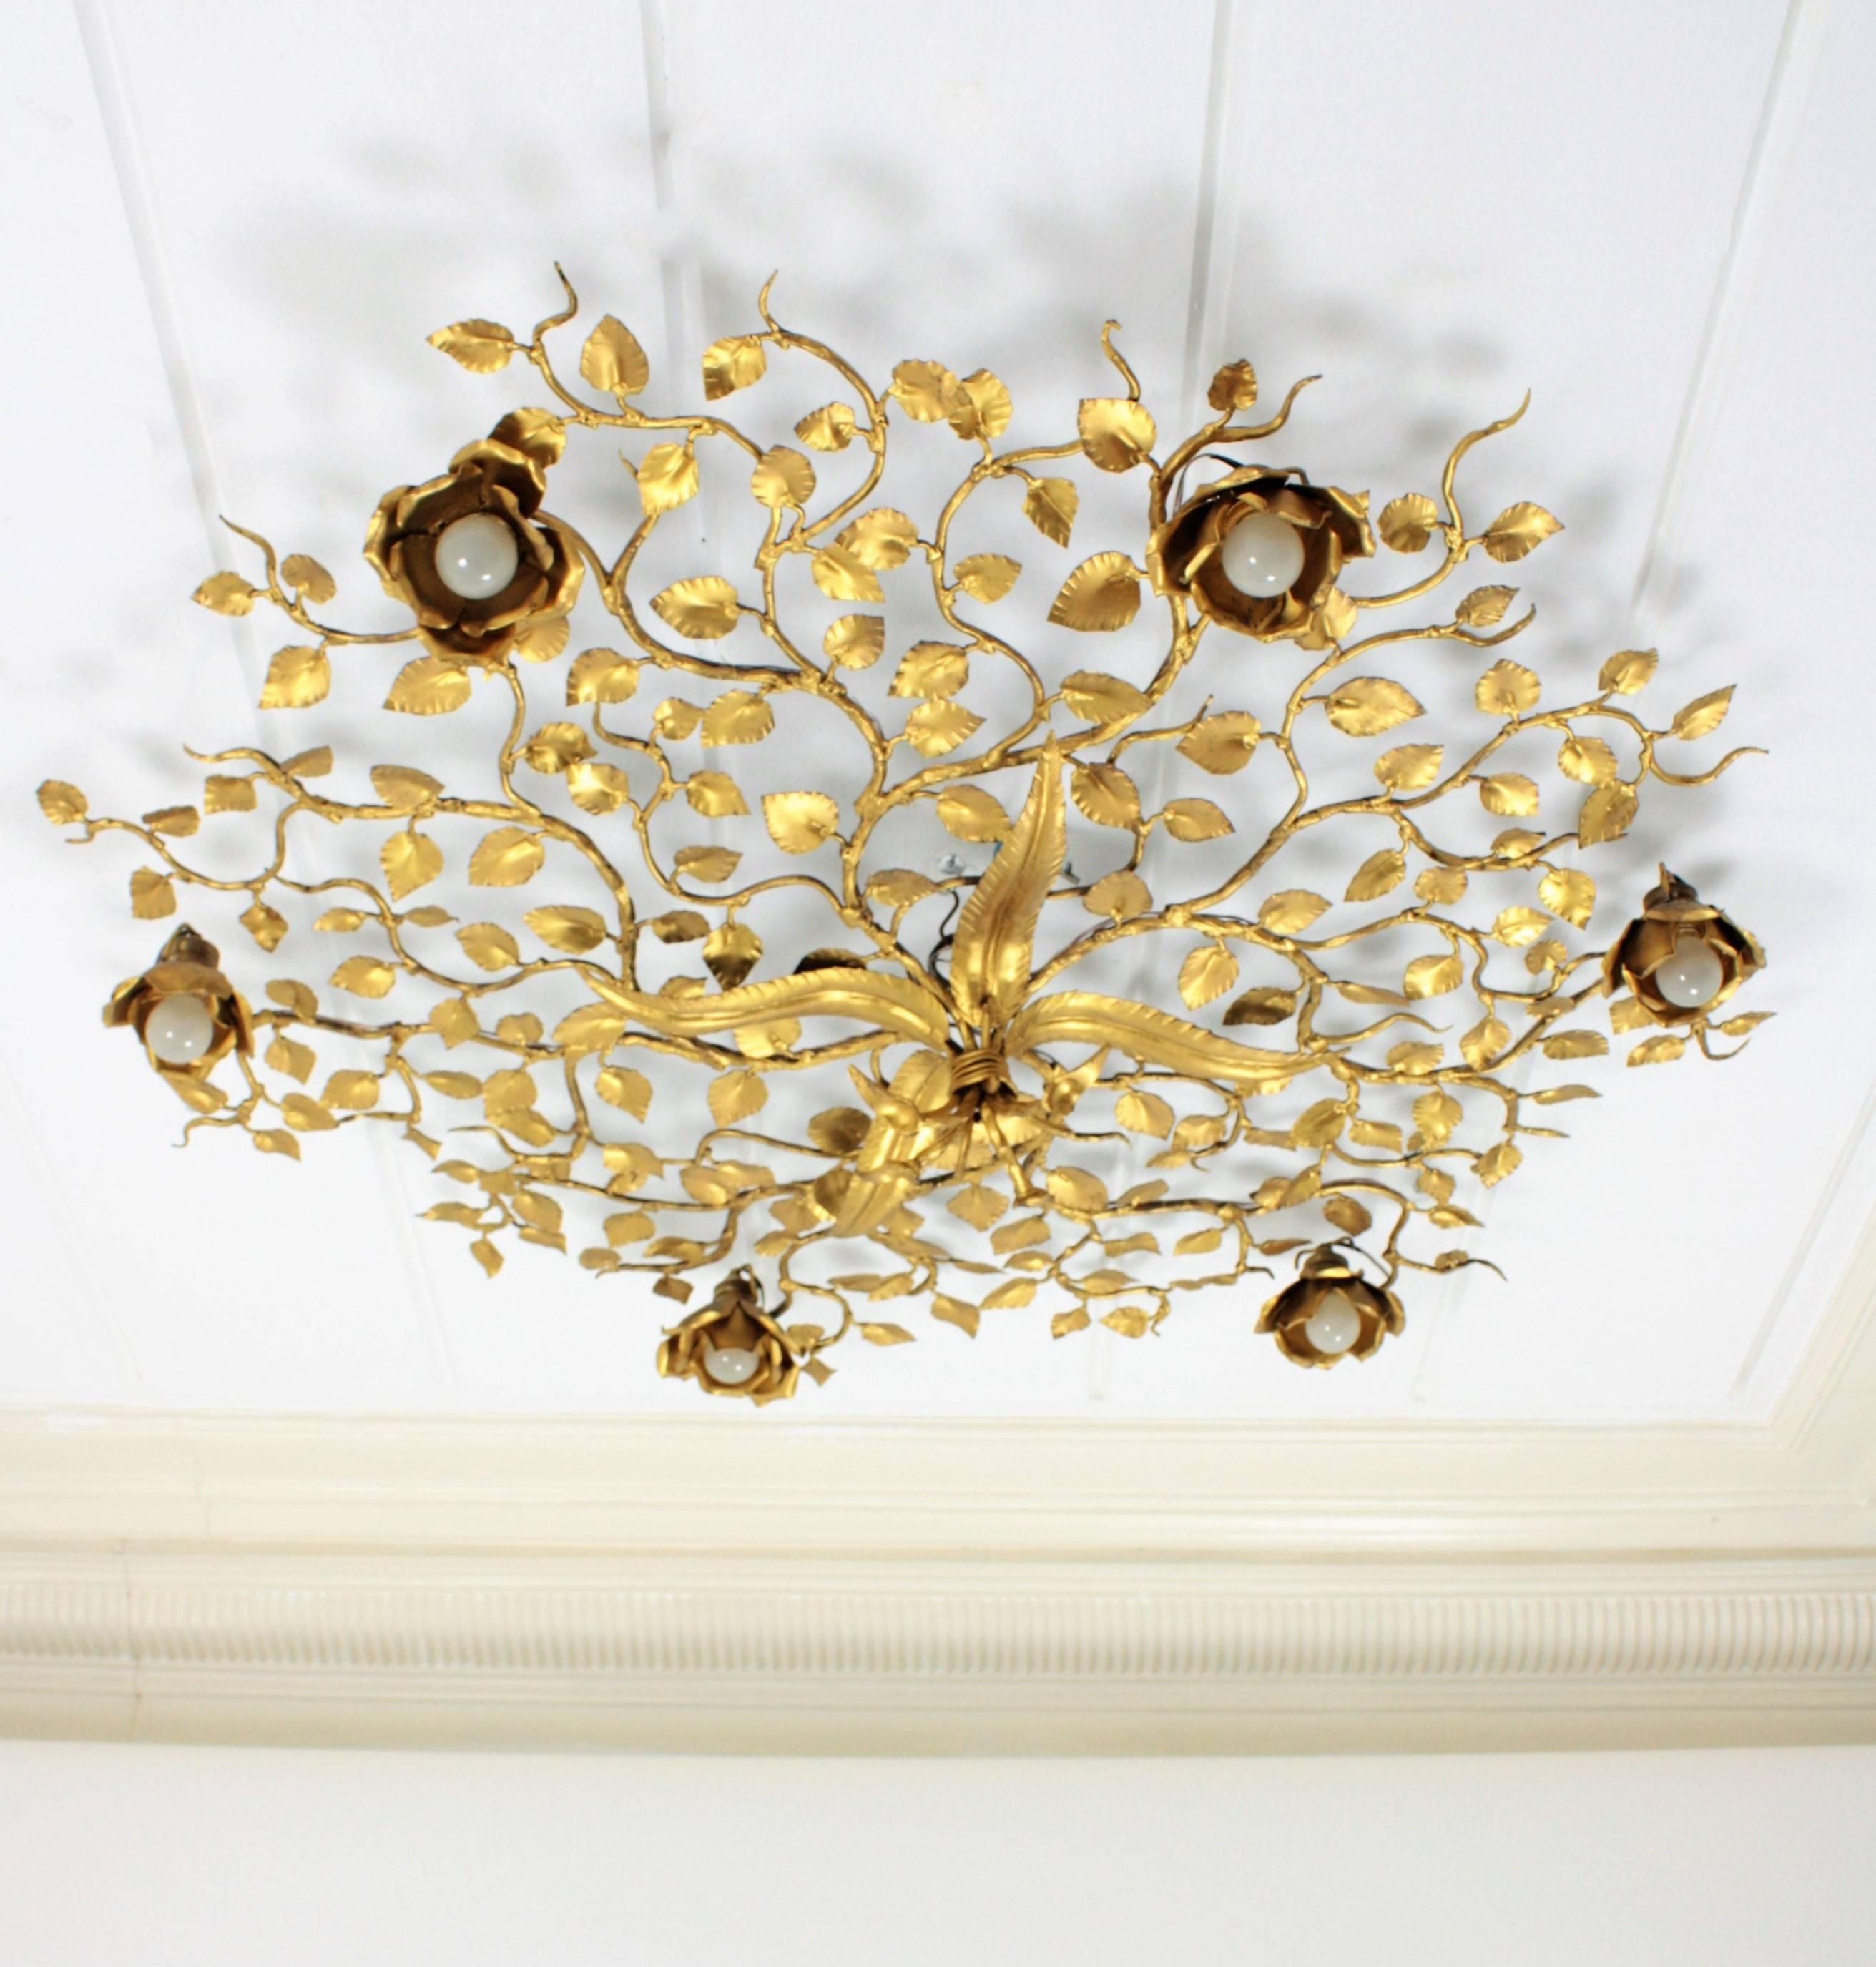 Unusual large size hand hammered gilt iron ornate flower bush ceiling light fixture with six flower lights. An spectacular Hollywood Regency style piece to preside a main room or a living room. This light fixture could also work as a big wall sconce